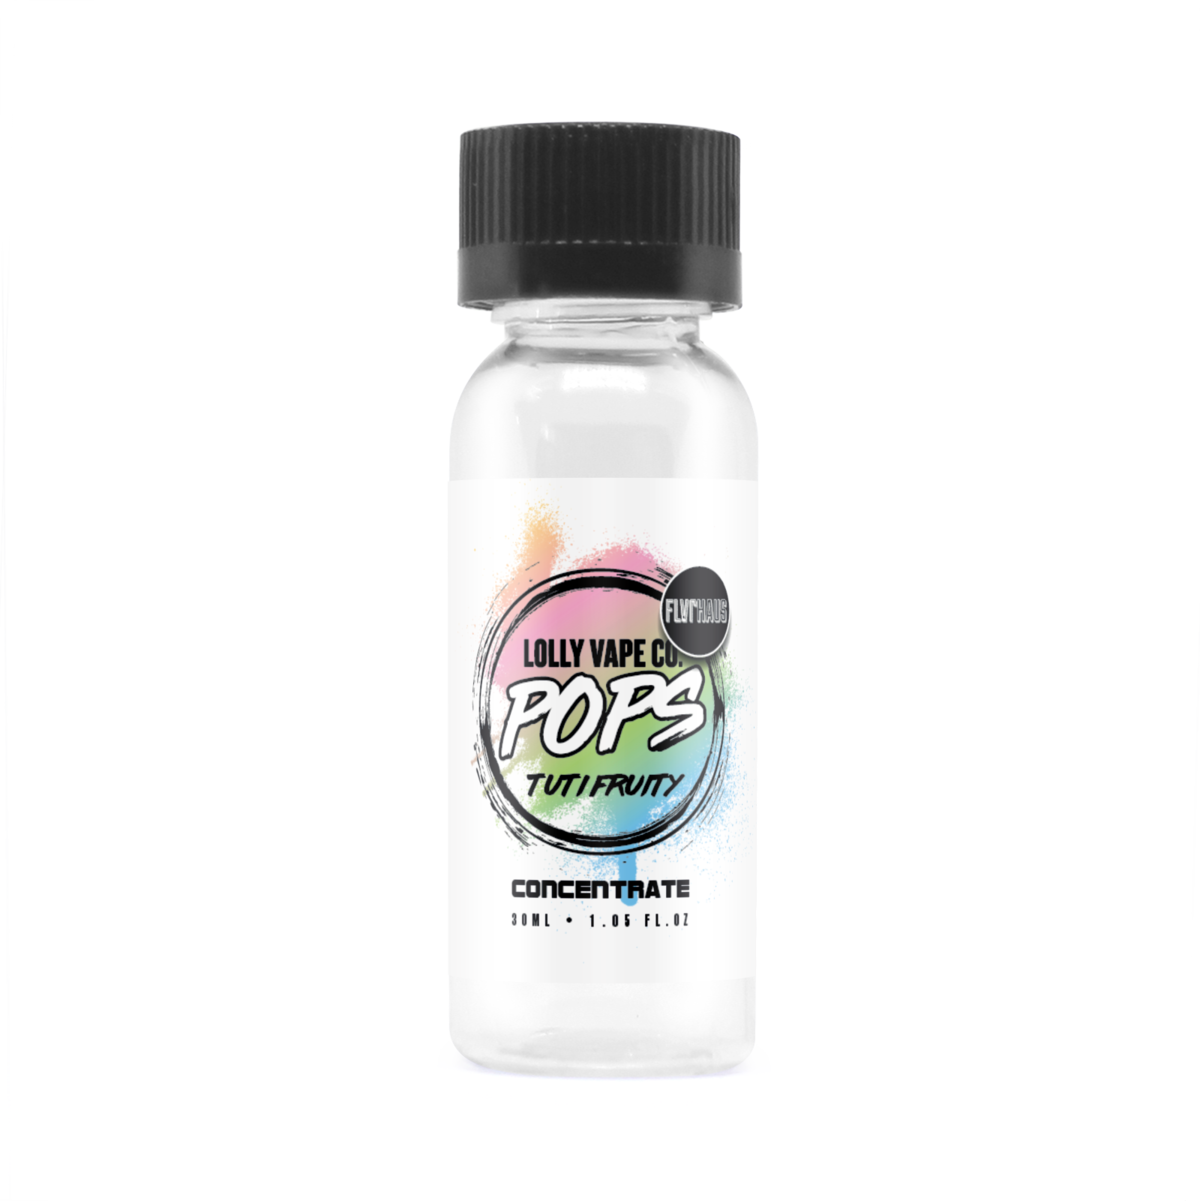 Tutti Fruity Concentrate E-Liquid by Lolly Vape Co 30ml